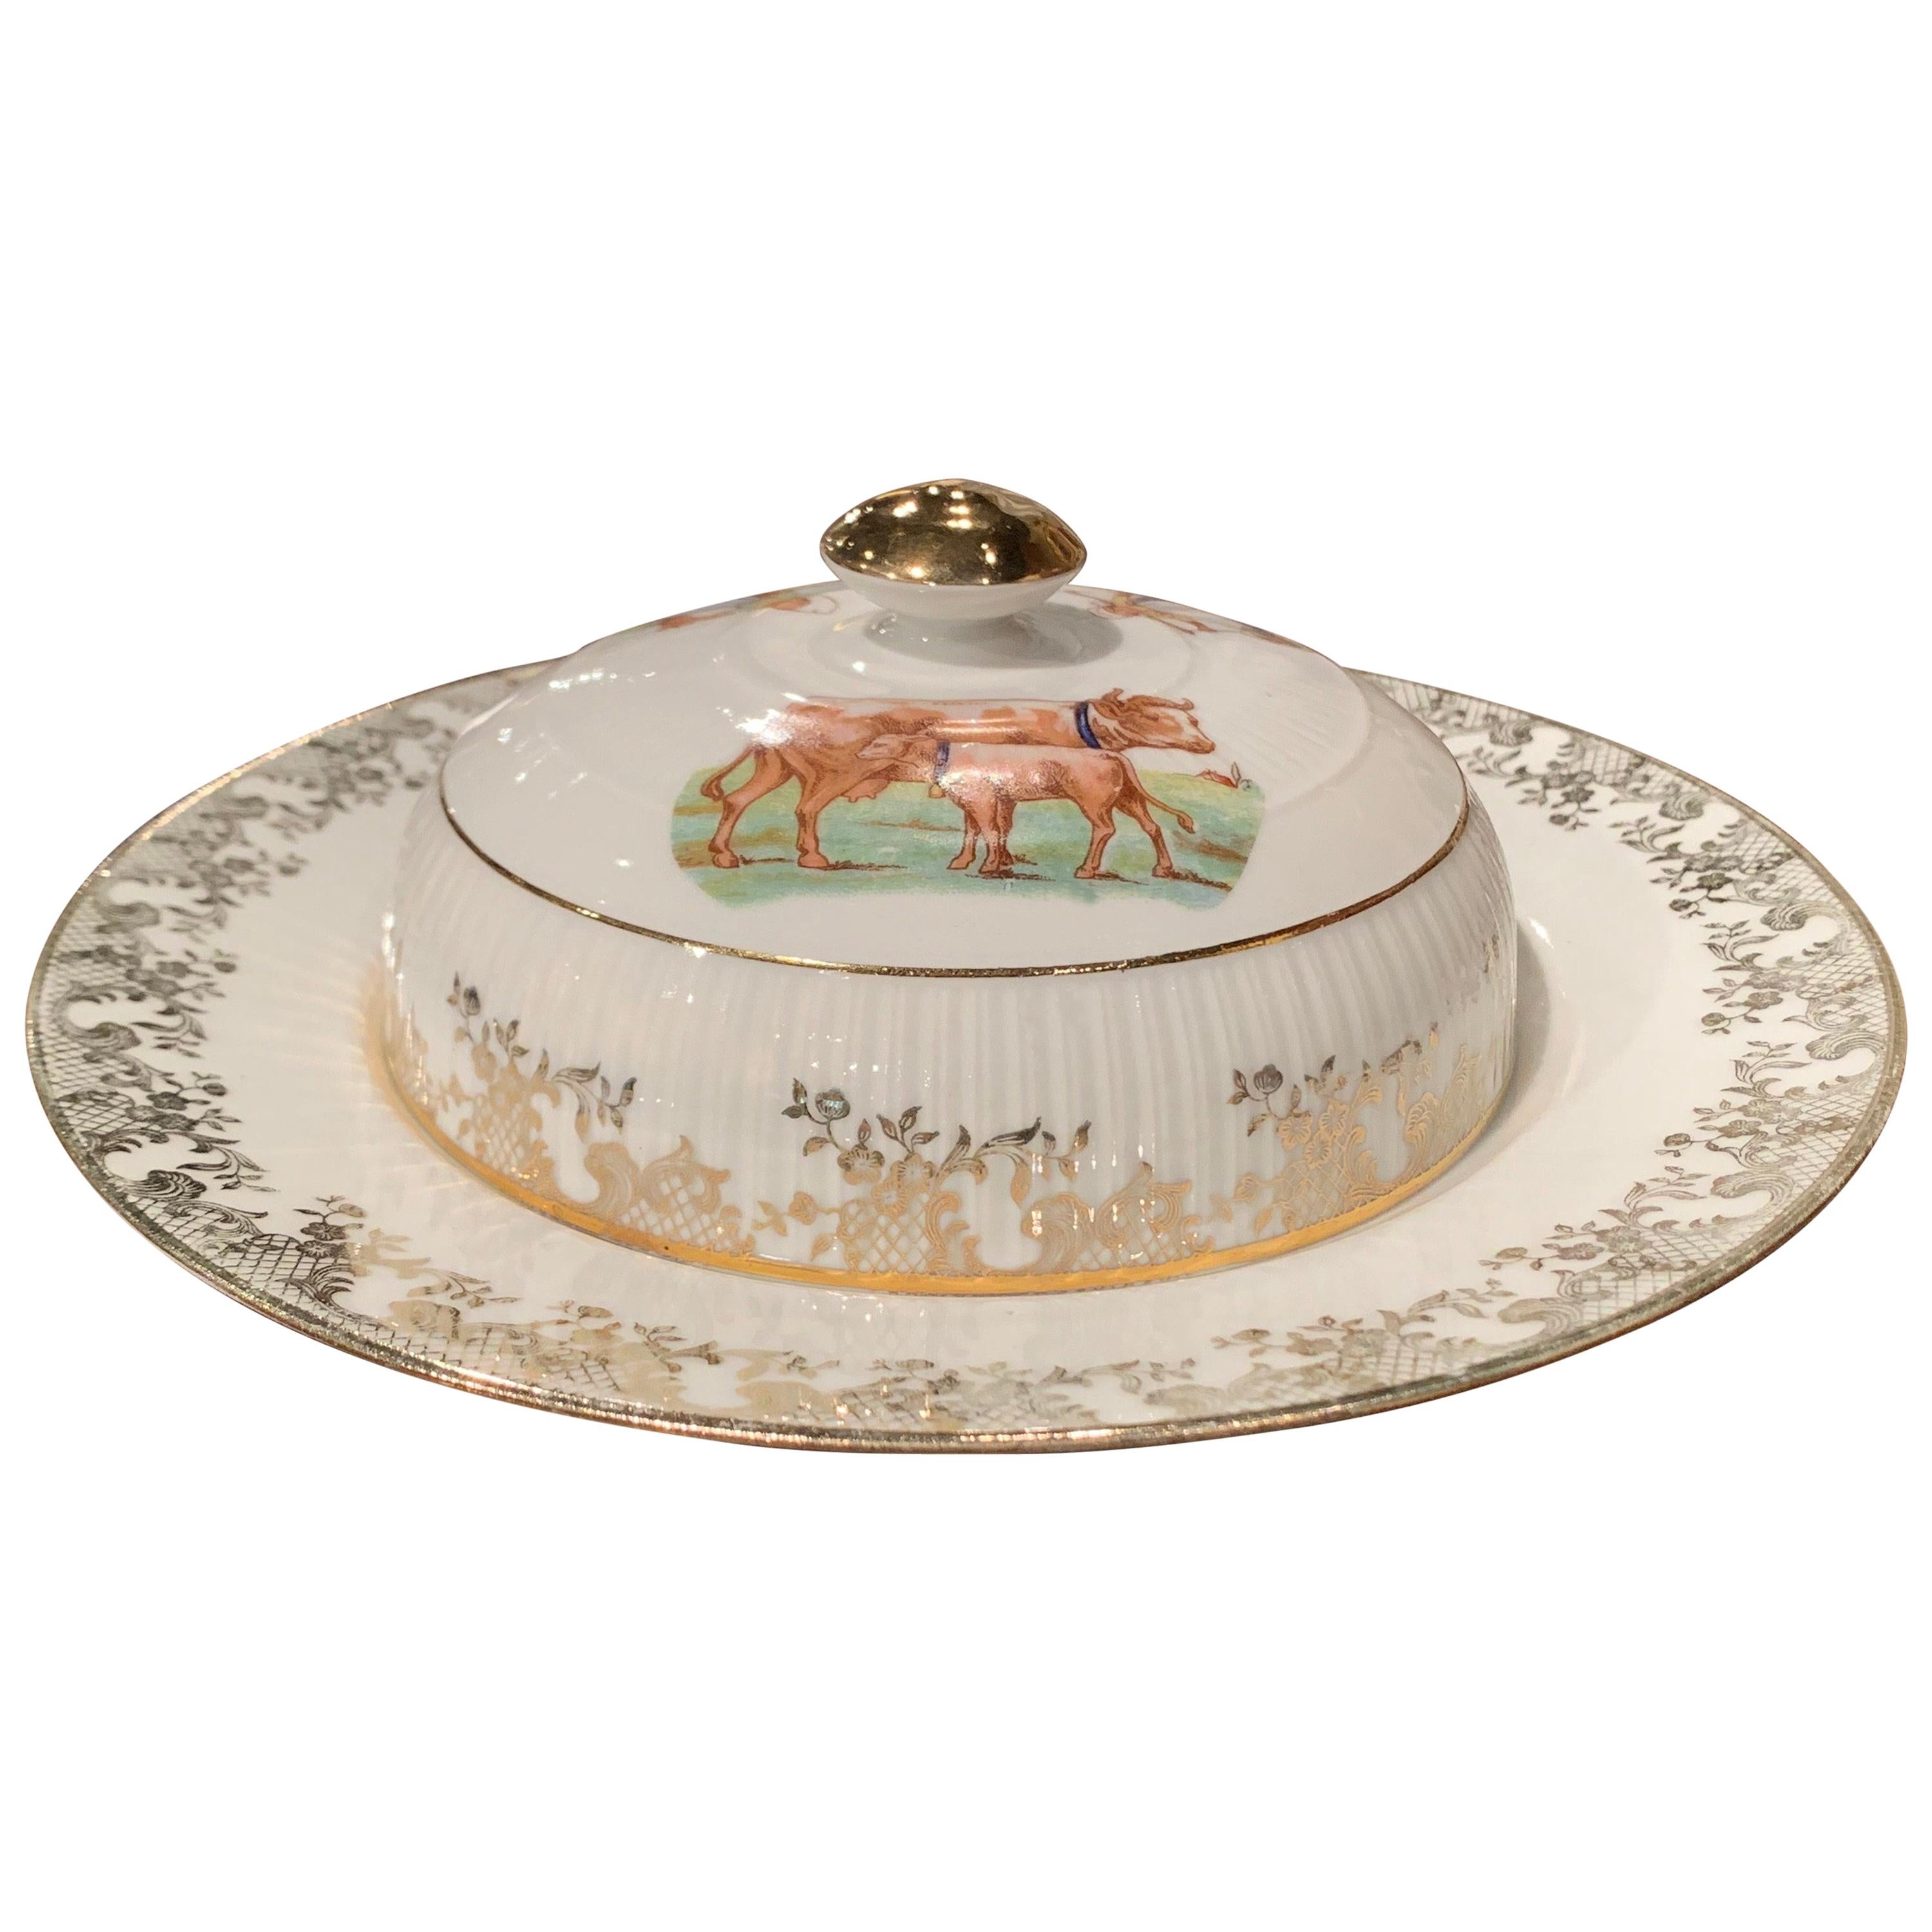 19th Century French Hand Painted and Gilt Porcelain Butter Dish from Limoges